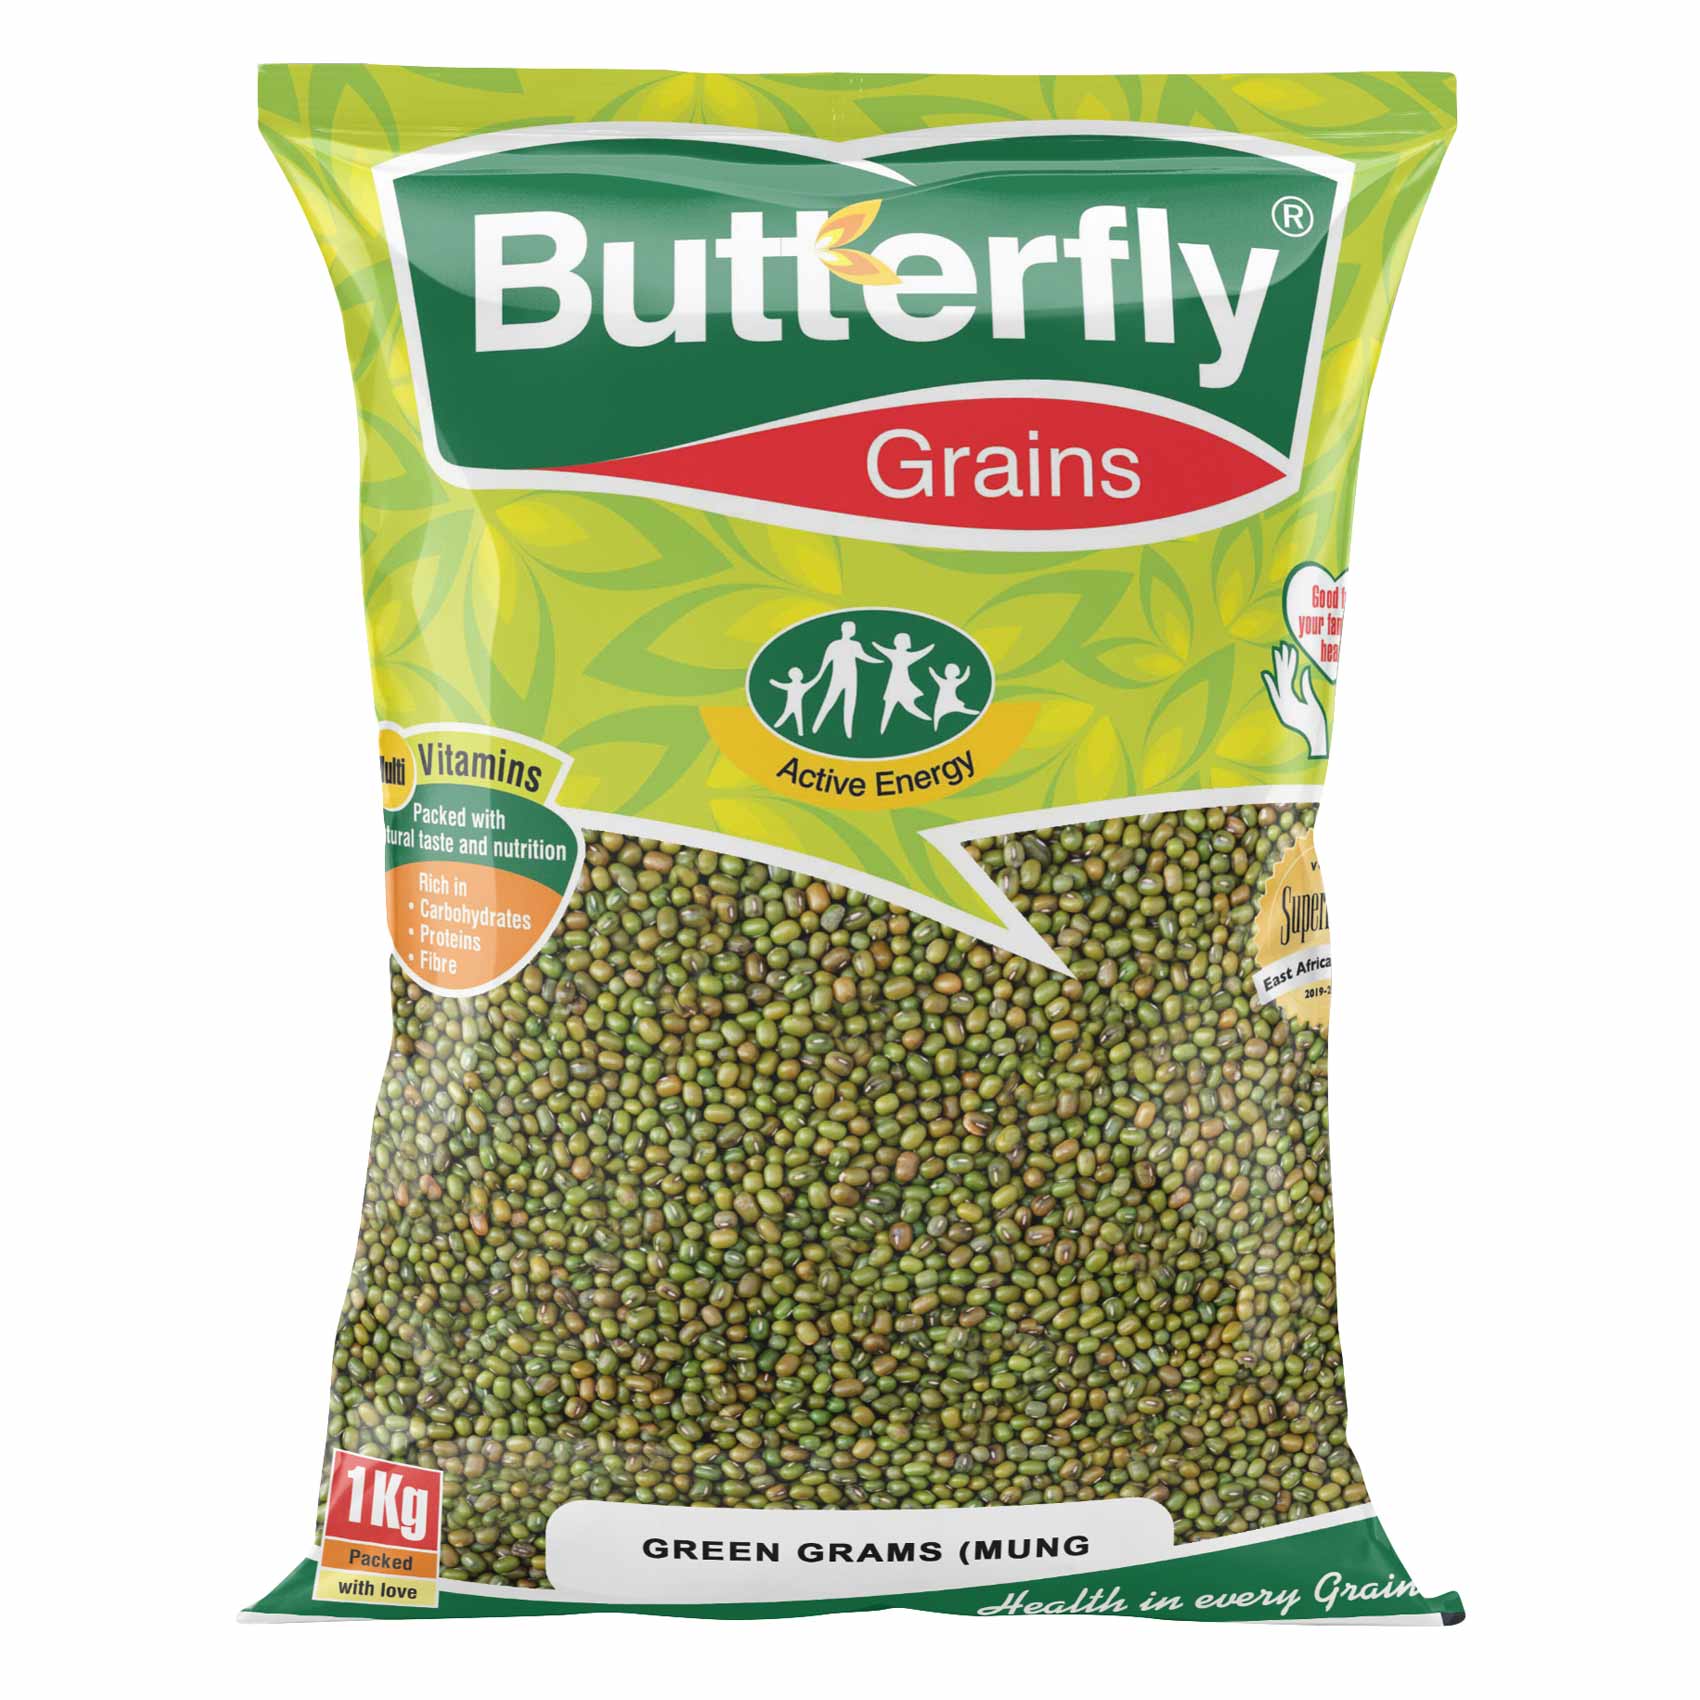 Butterfly Grains Polished Green Grams 1Kg